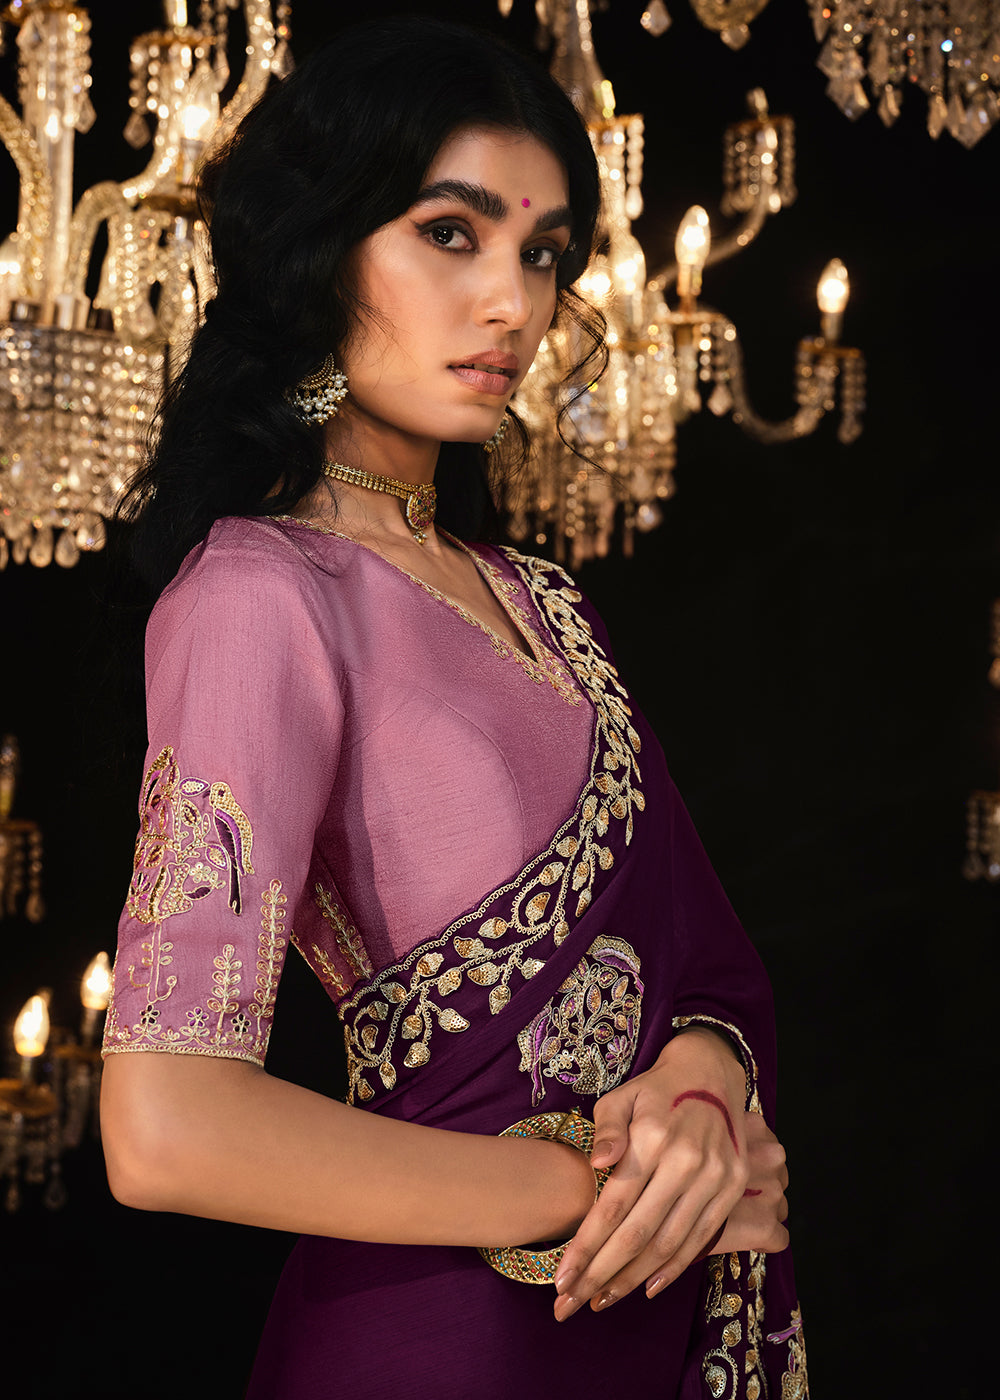 Buy Now Fancy Purple Embroidered Designer Wedding Wear Saree Online in USA, UK, Canada & Worldwide at Empress Clothing.